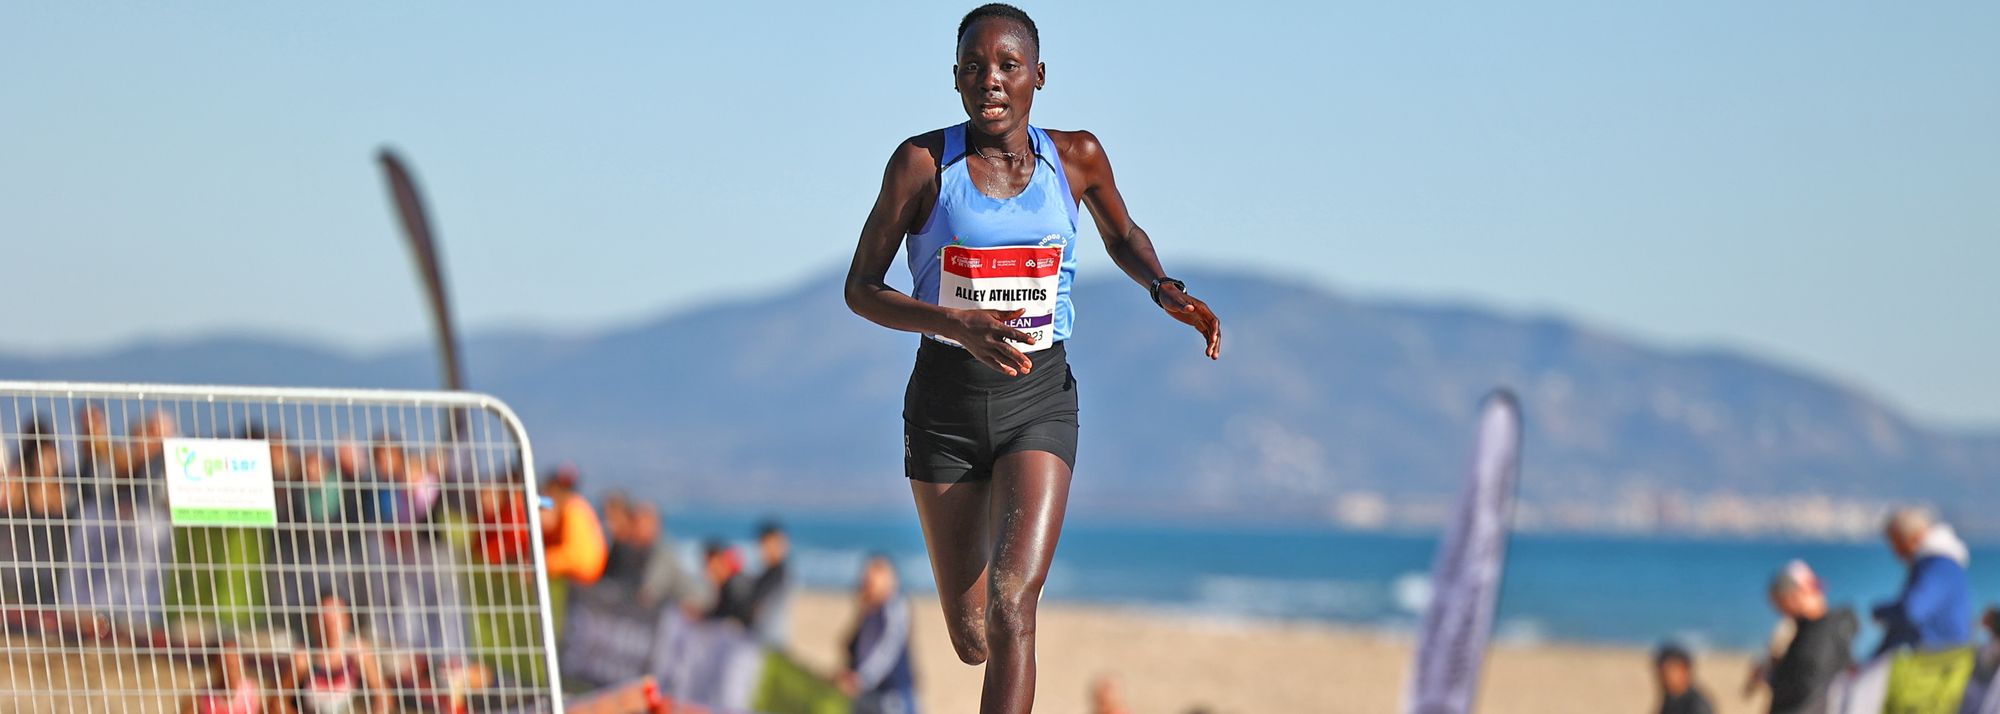 Lohalith's win marked the first time that an athlete in the World Athletics refugee team programme notched a victory in an international competition.